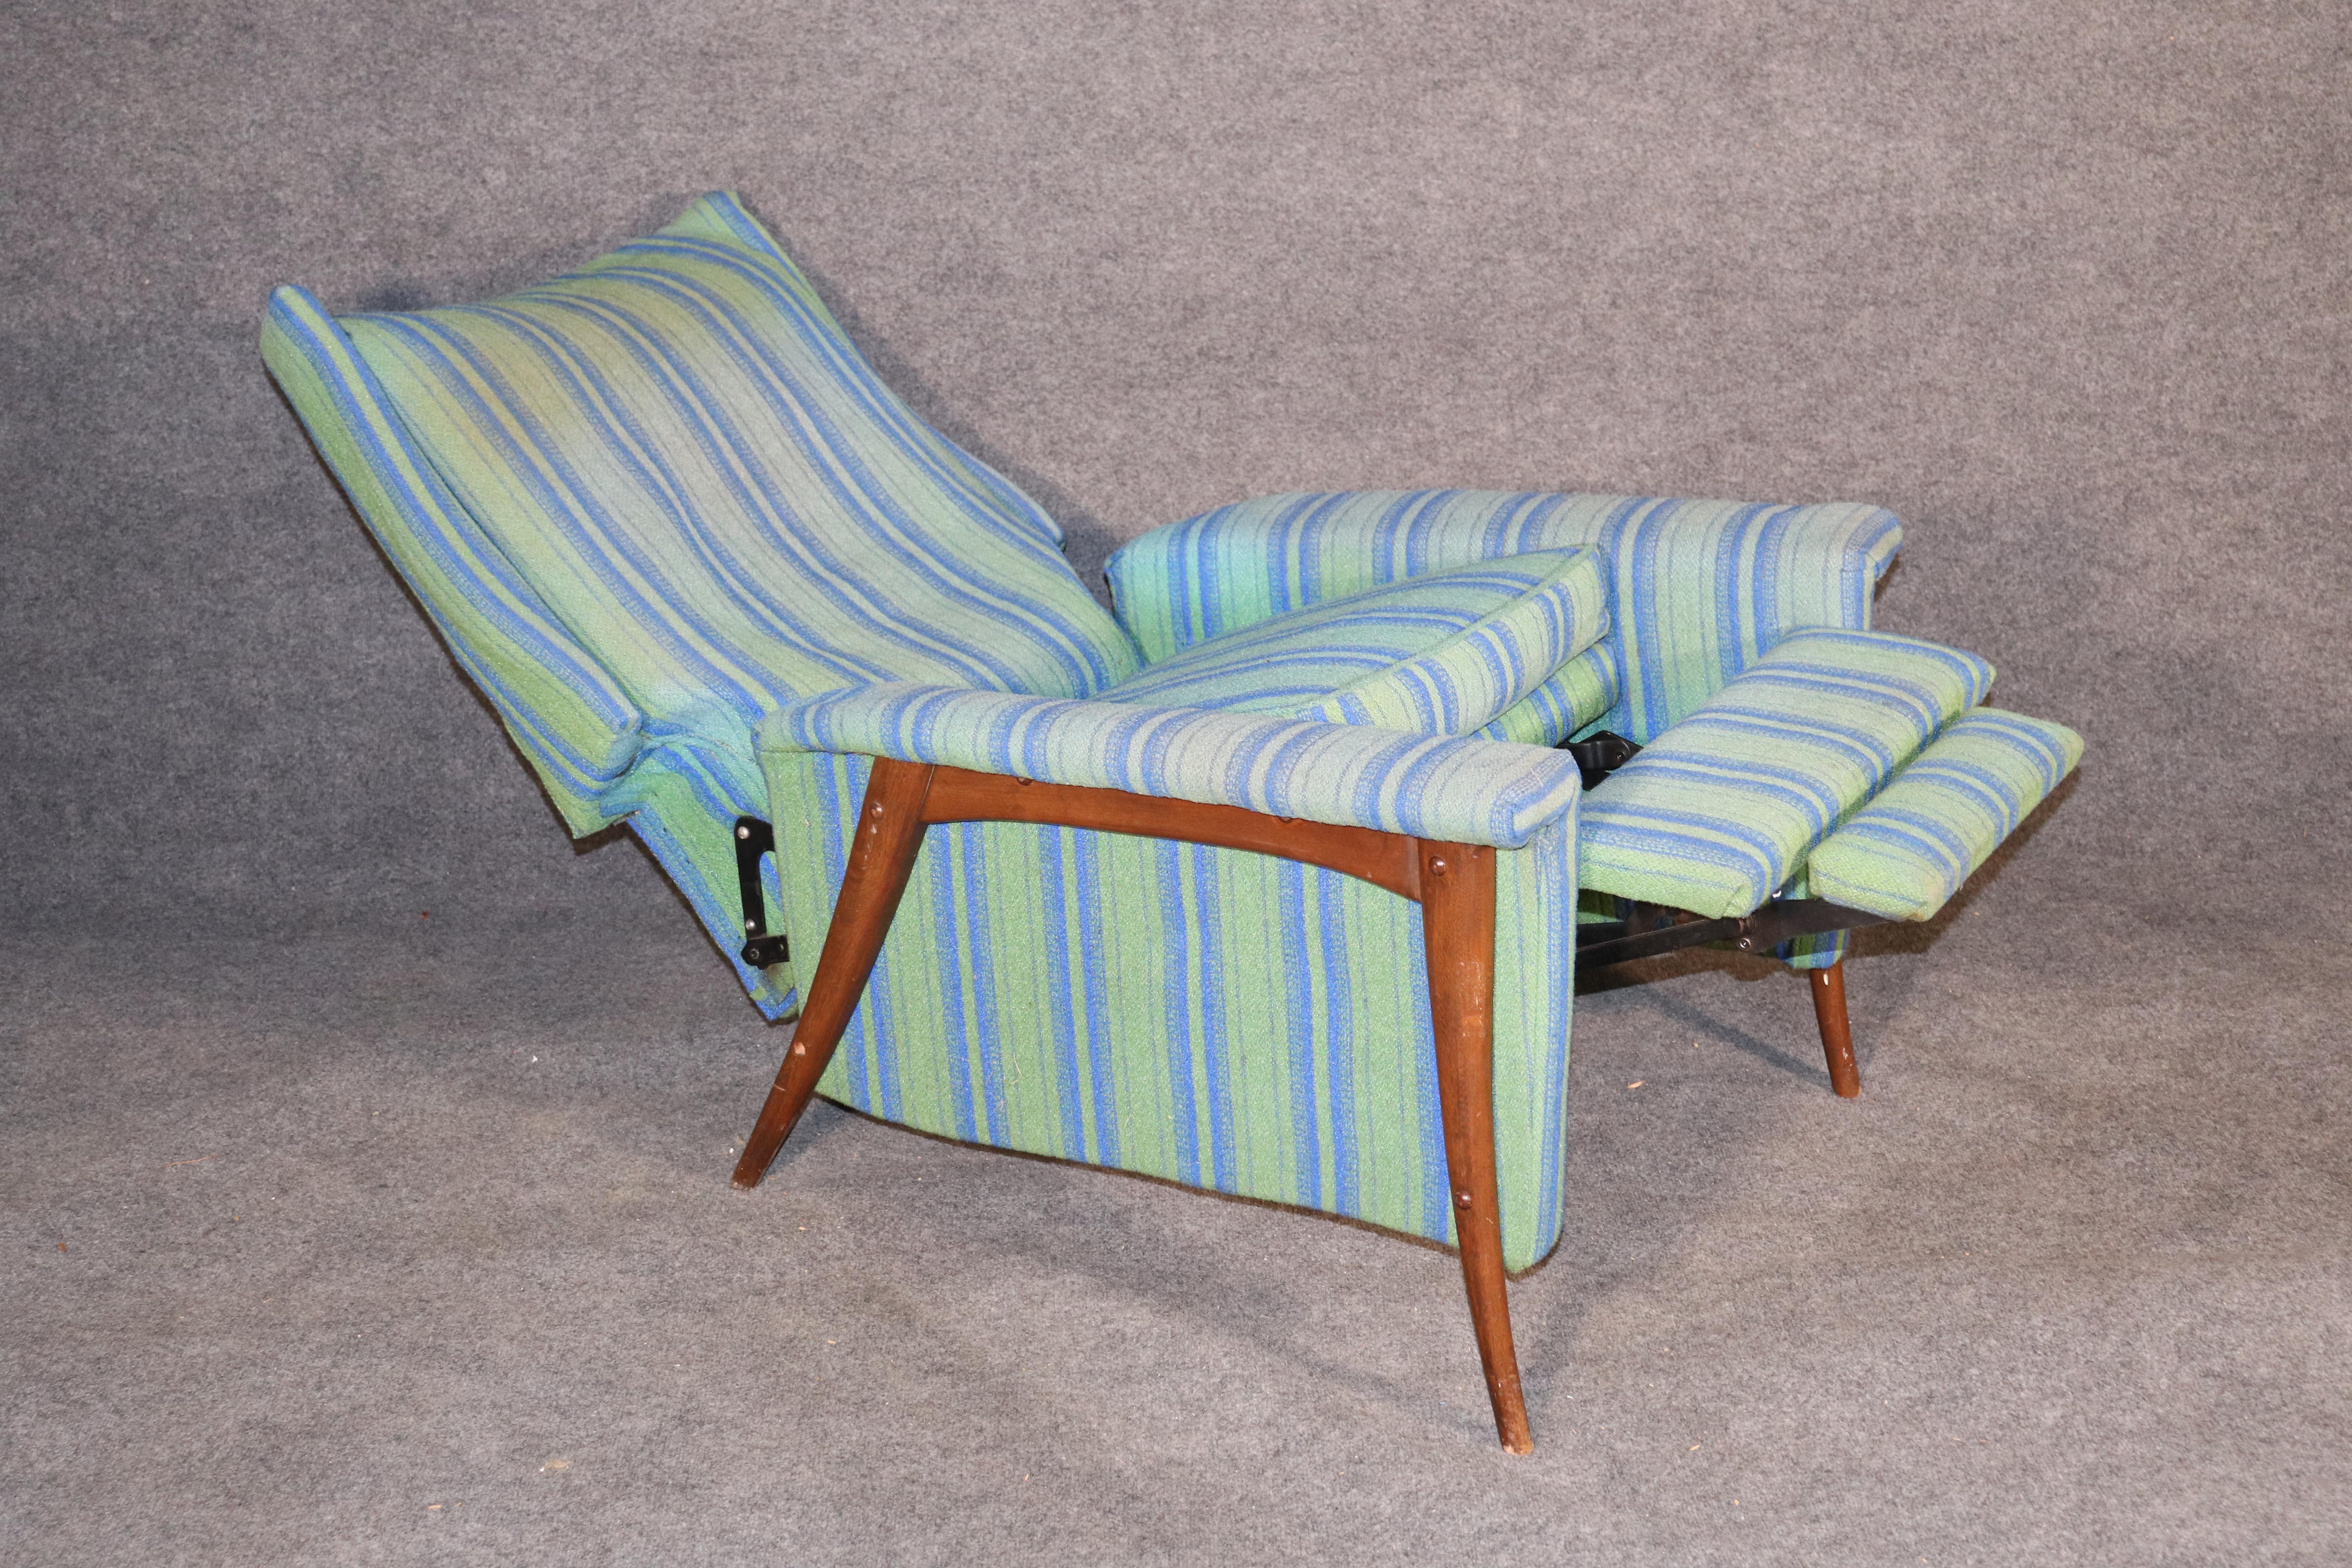 American made Mid-Century Modern lounge chair with reclining function. Fun vintage fabric over a sculpted walnut frame.
Please confirm location.